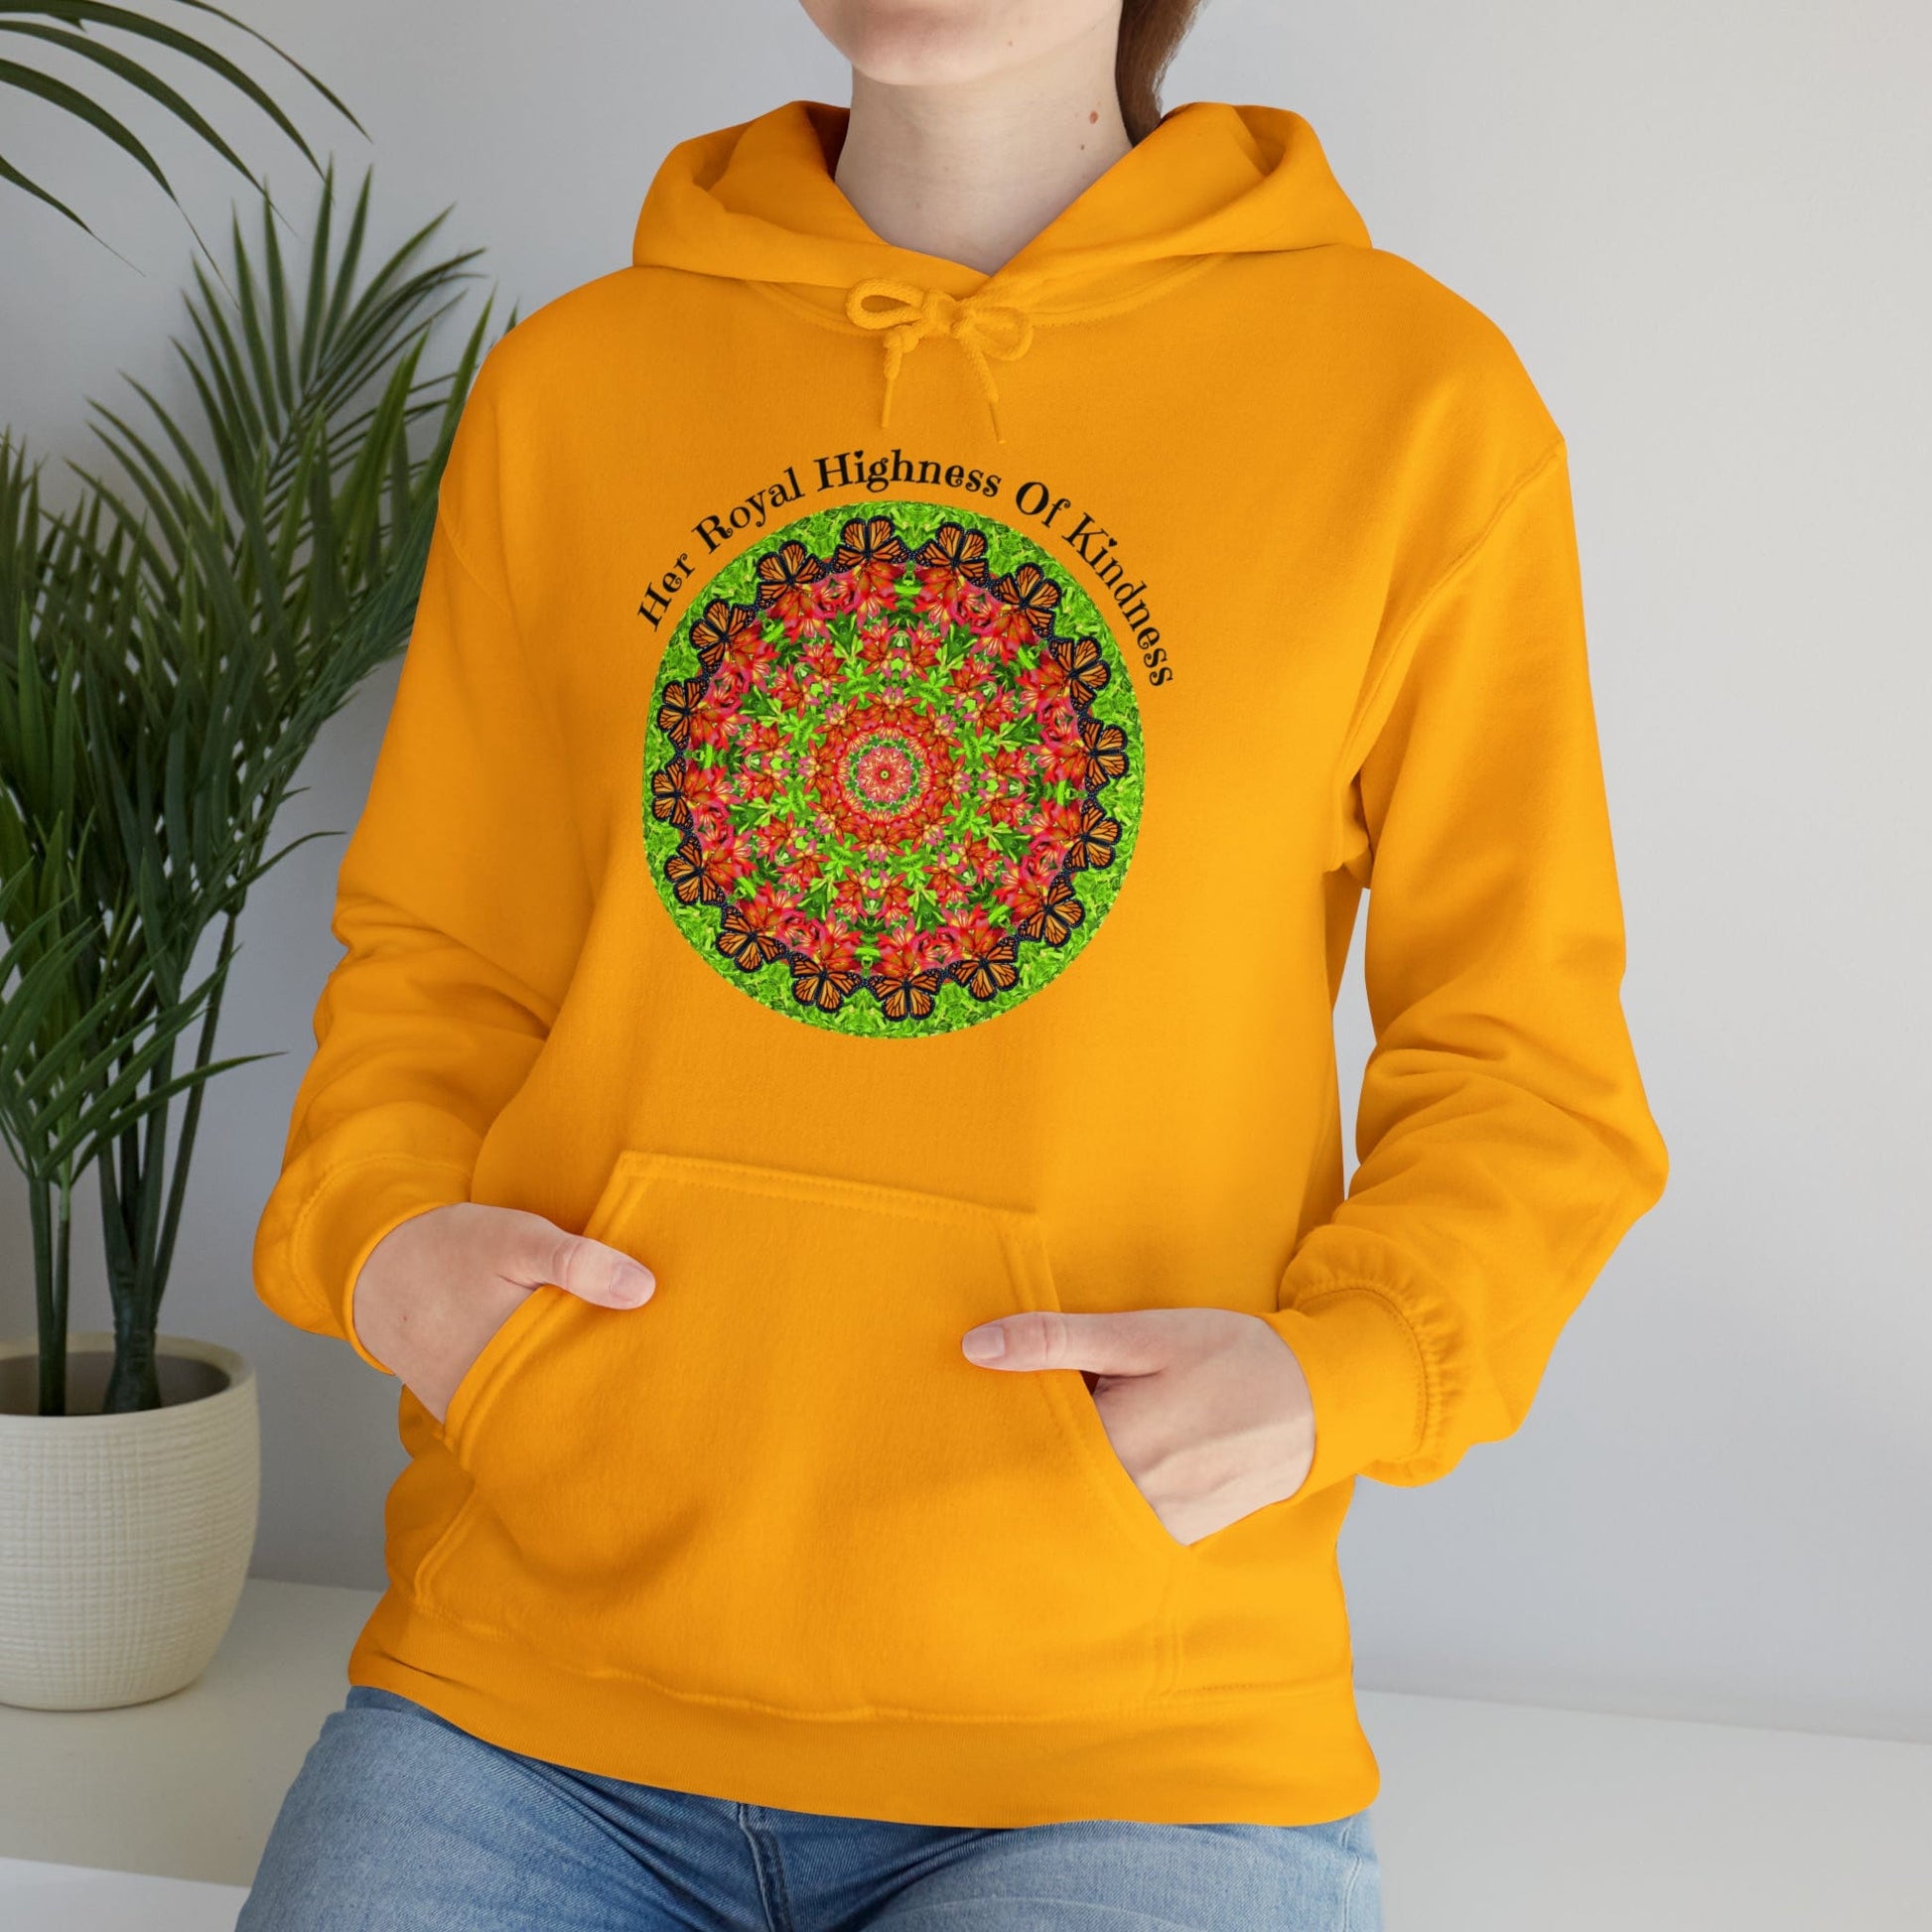 Pretty & Cute Butterfly Kindness Graphic Hoodie Sweatshirt Monarch Butterfly Mandala Art Her Royal Highness Of Kindness gold